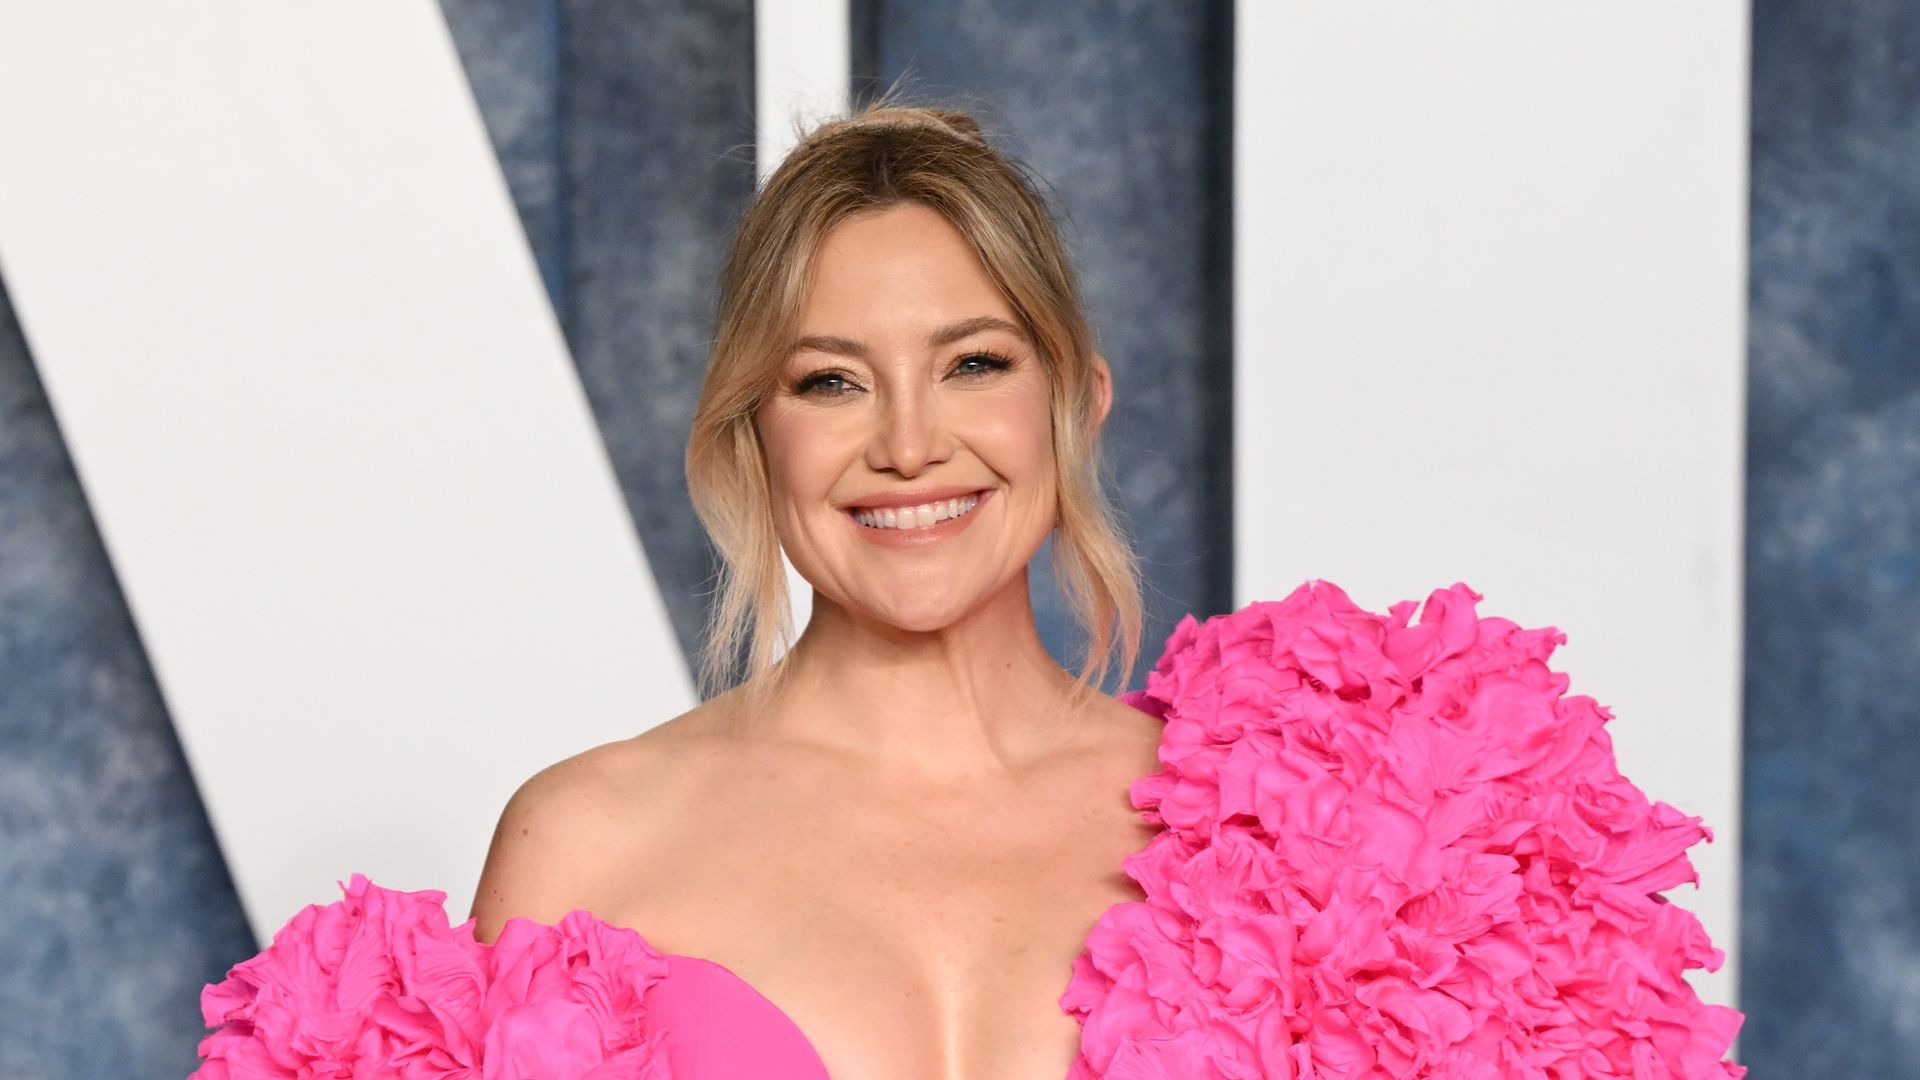 Kate Hudson attends the 2023 Vanity Fair Oscar Party hosted by Radhika Jones at Wallis Annenberg Center for the Performing Arts on March 12, 2023 in Beverly Hills, California